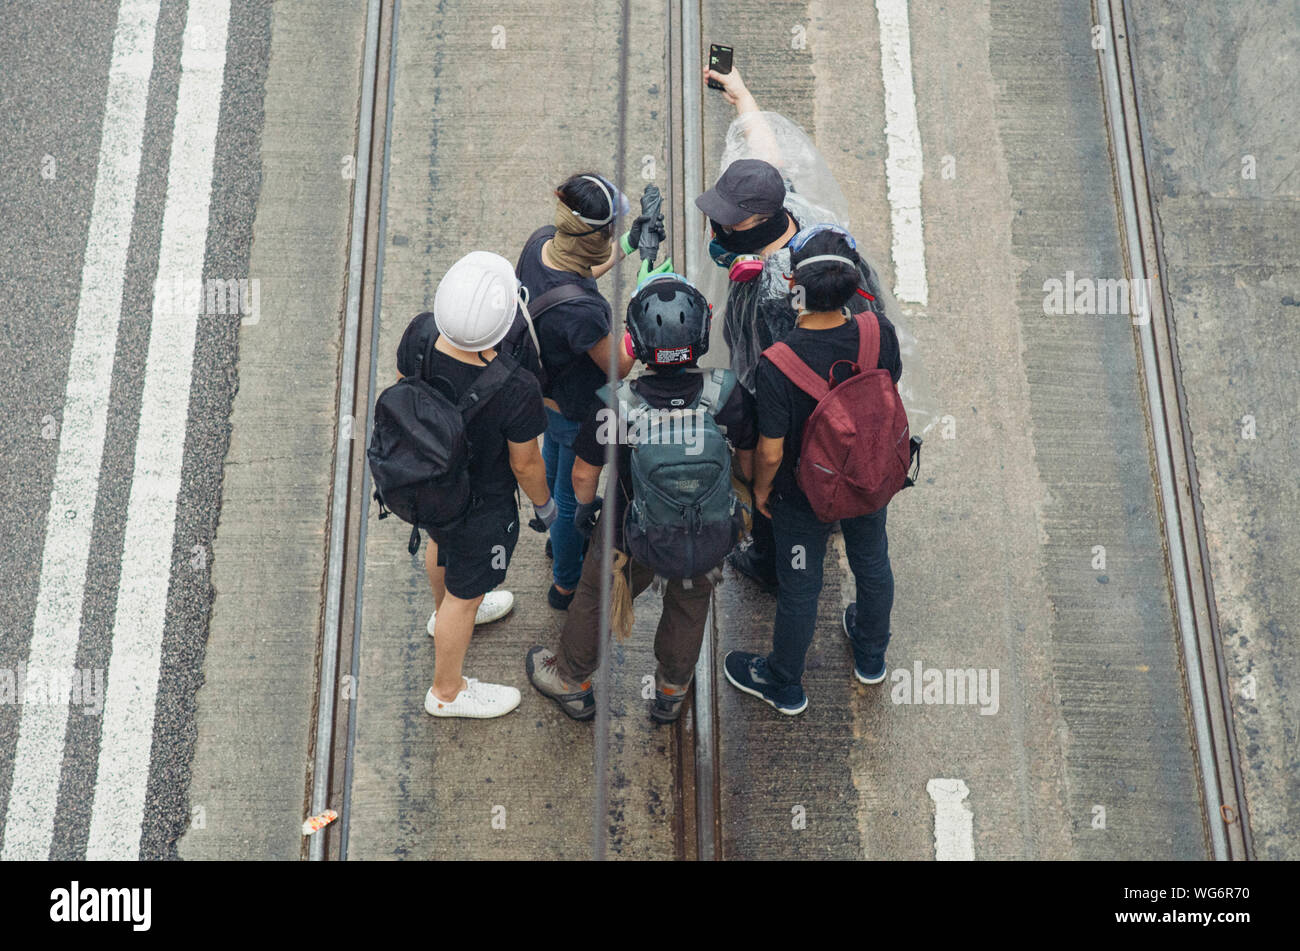 Hong Kong, 31 Aug 2019 - A group of Hong Kong protesters as black bloc gathering in protest march Stock Photo